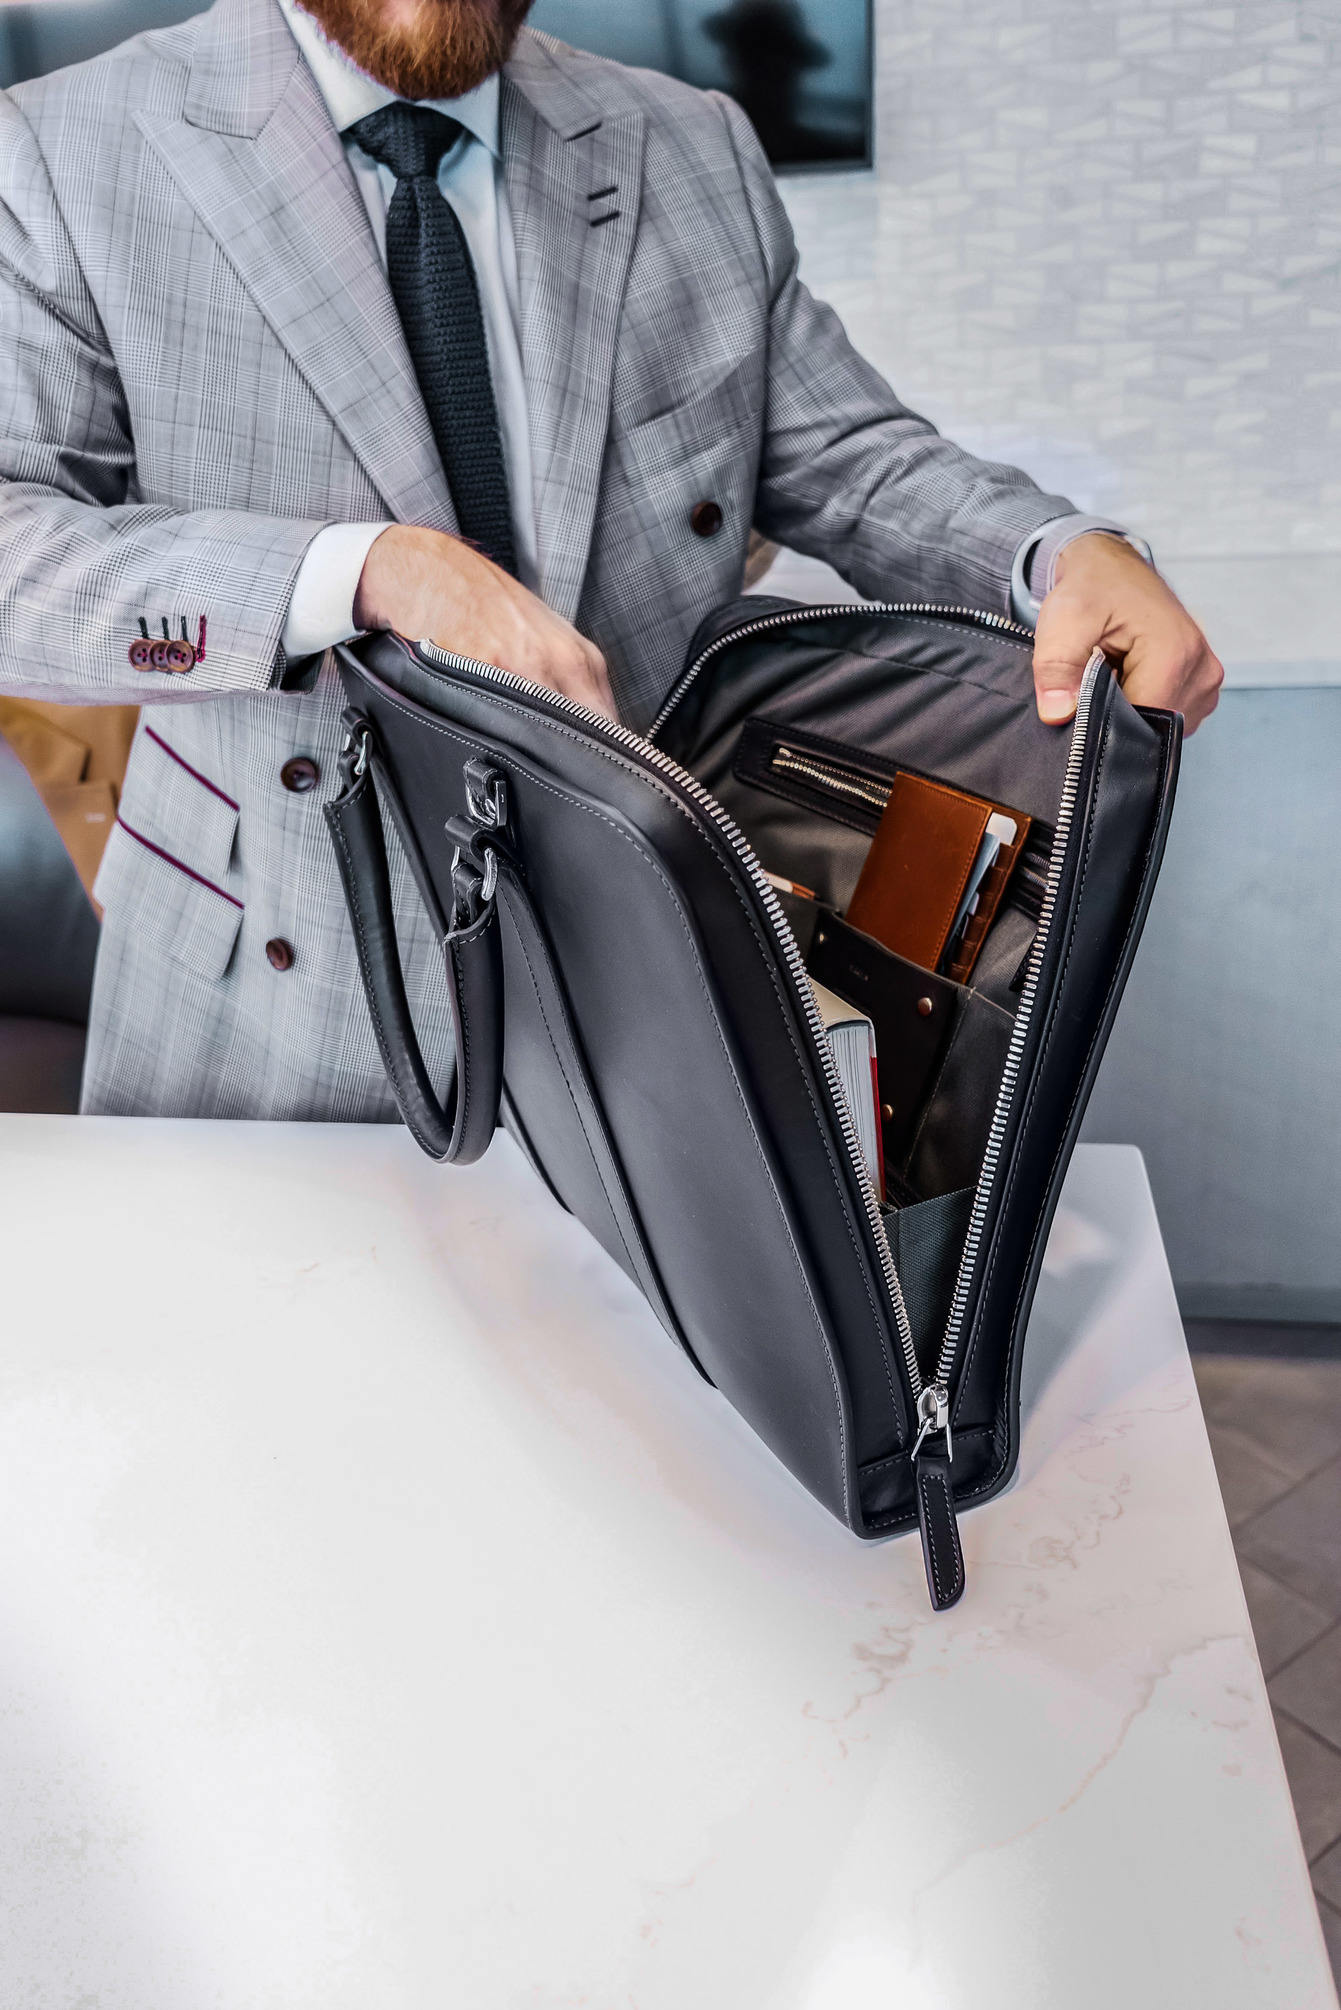 Opening the Palissy briefcase